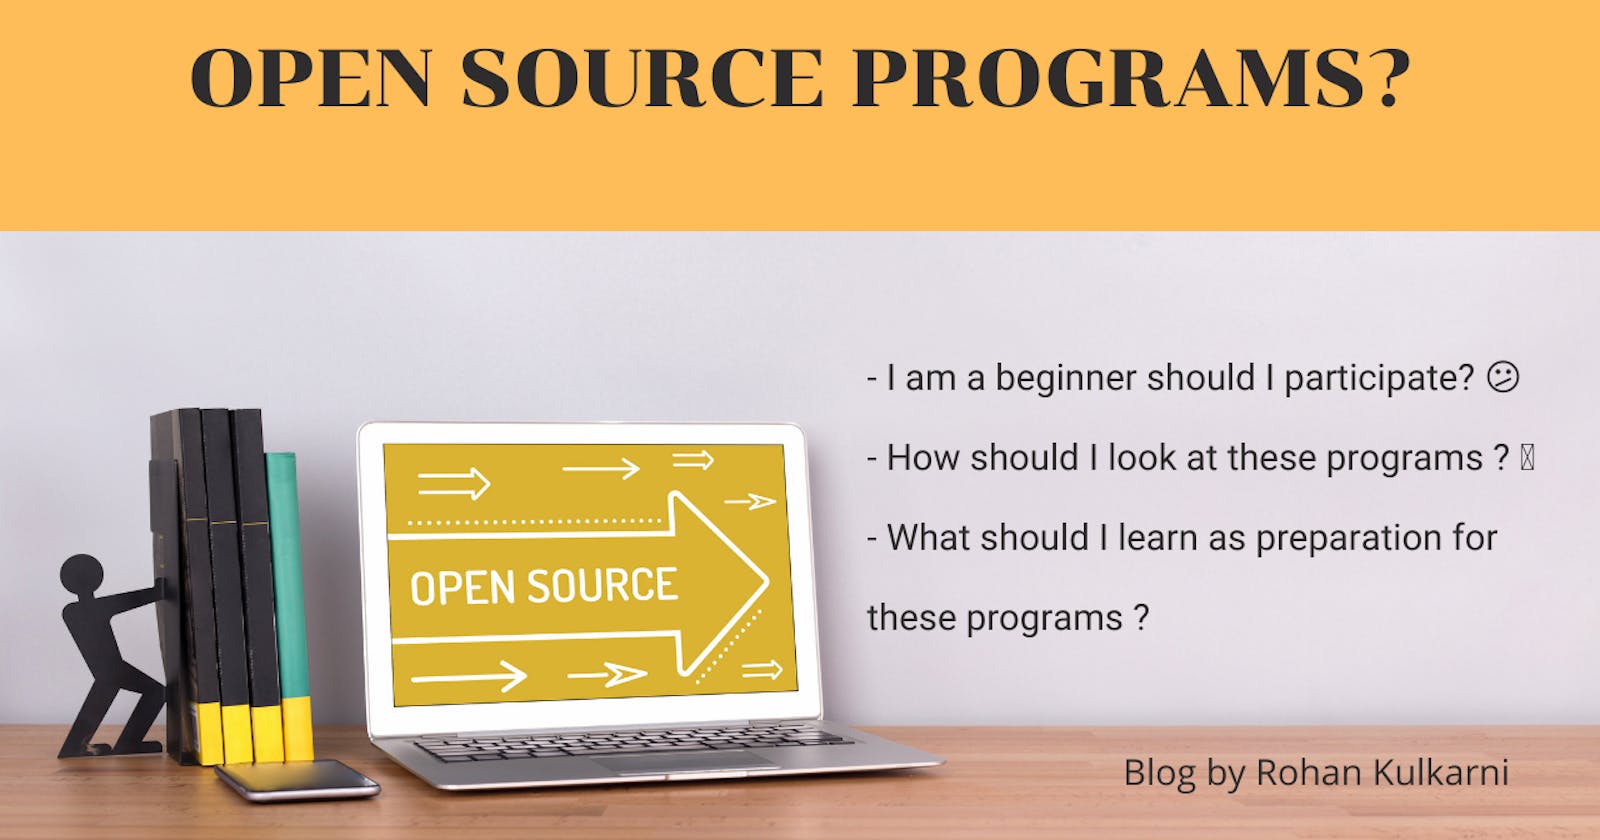 Should I Participate in Open Source Programs? 🤔